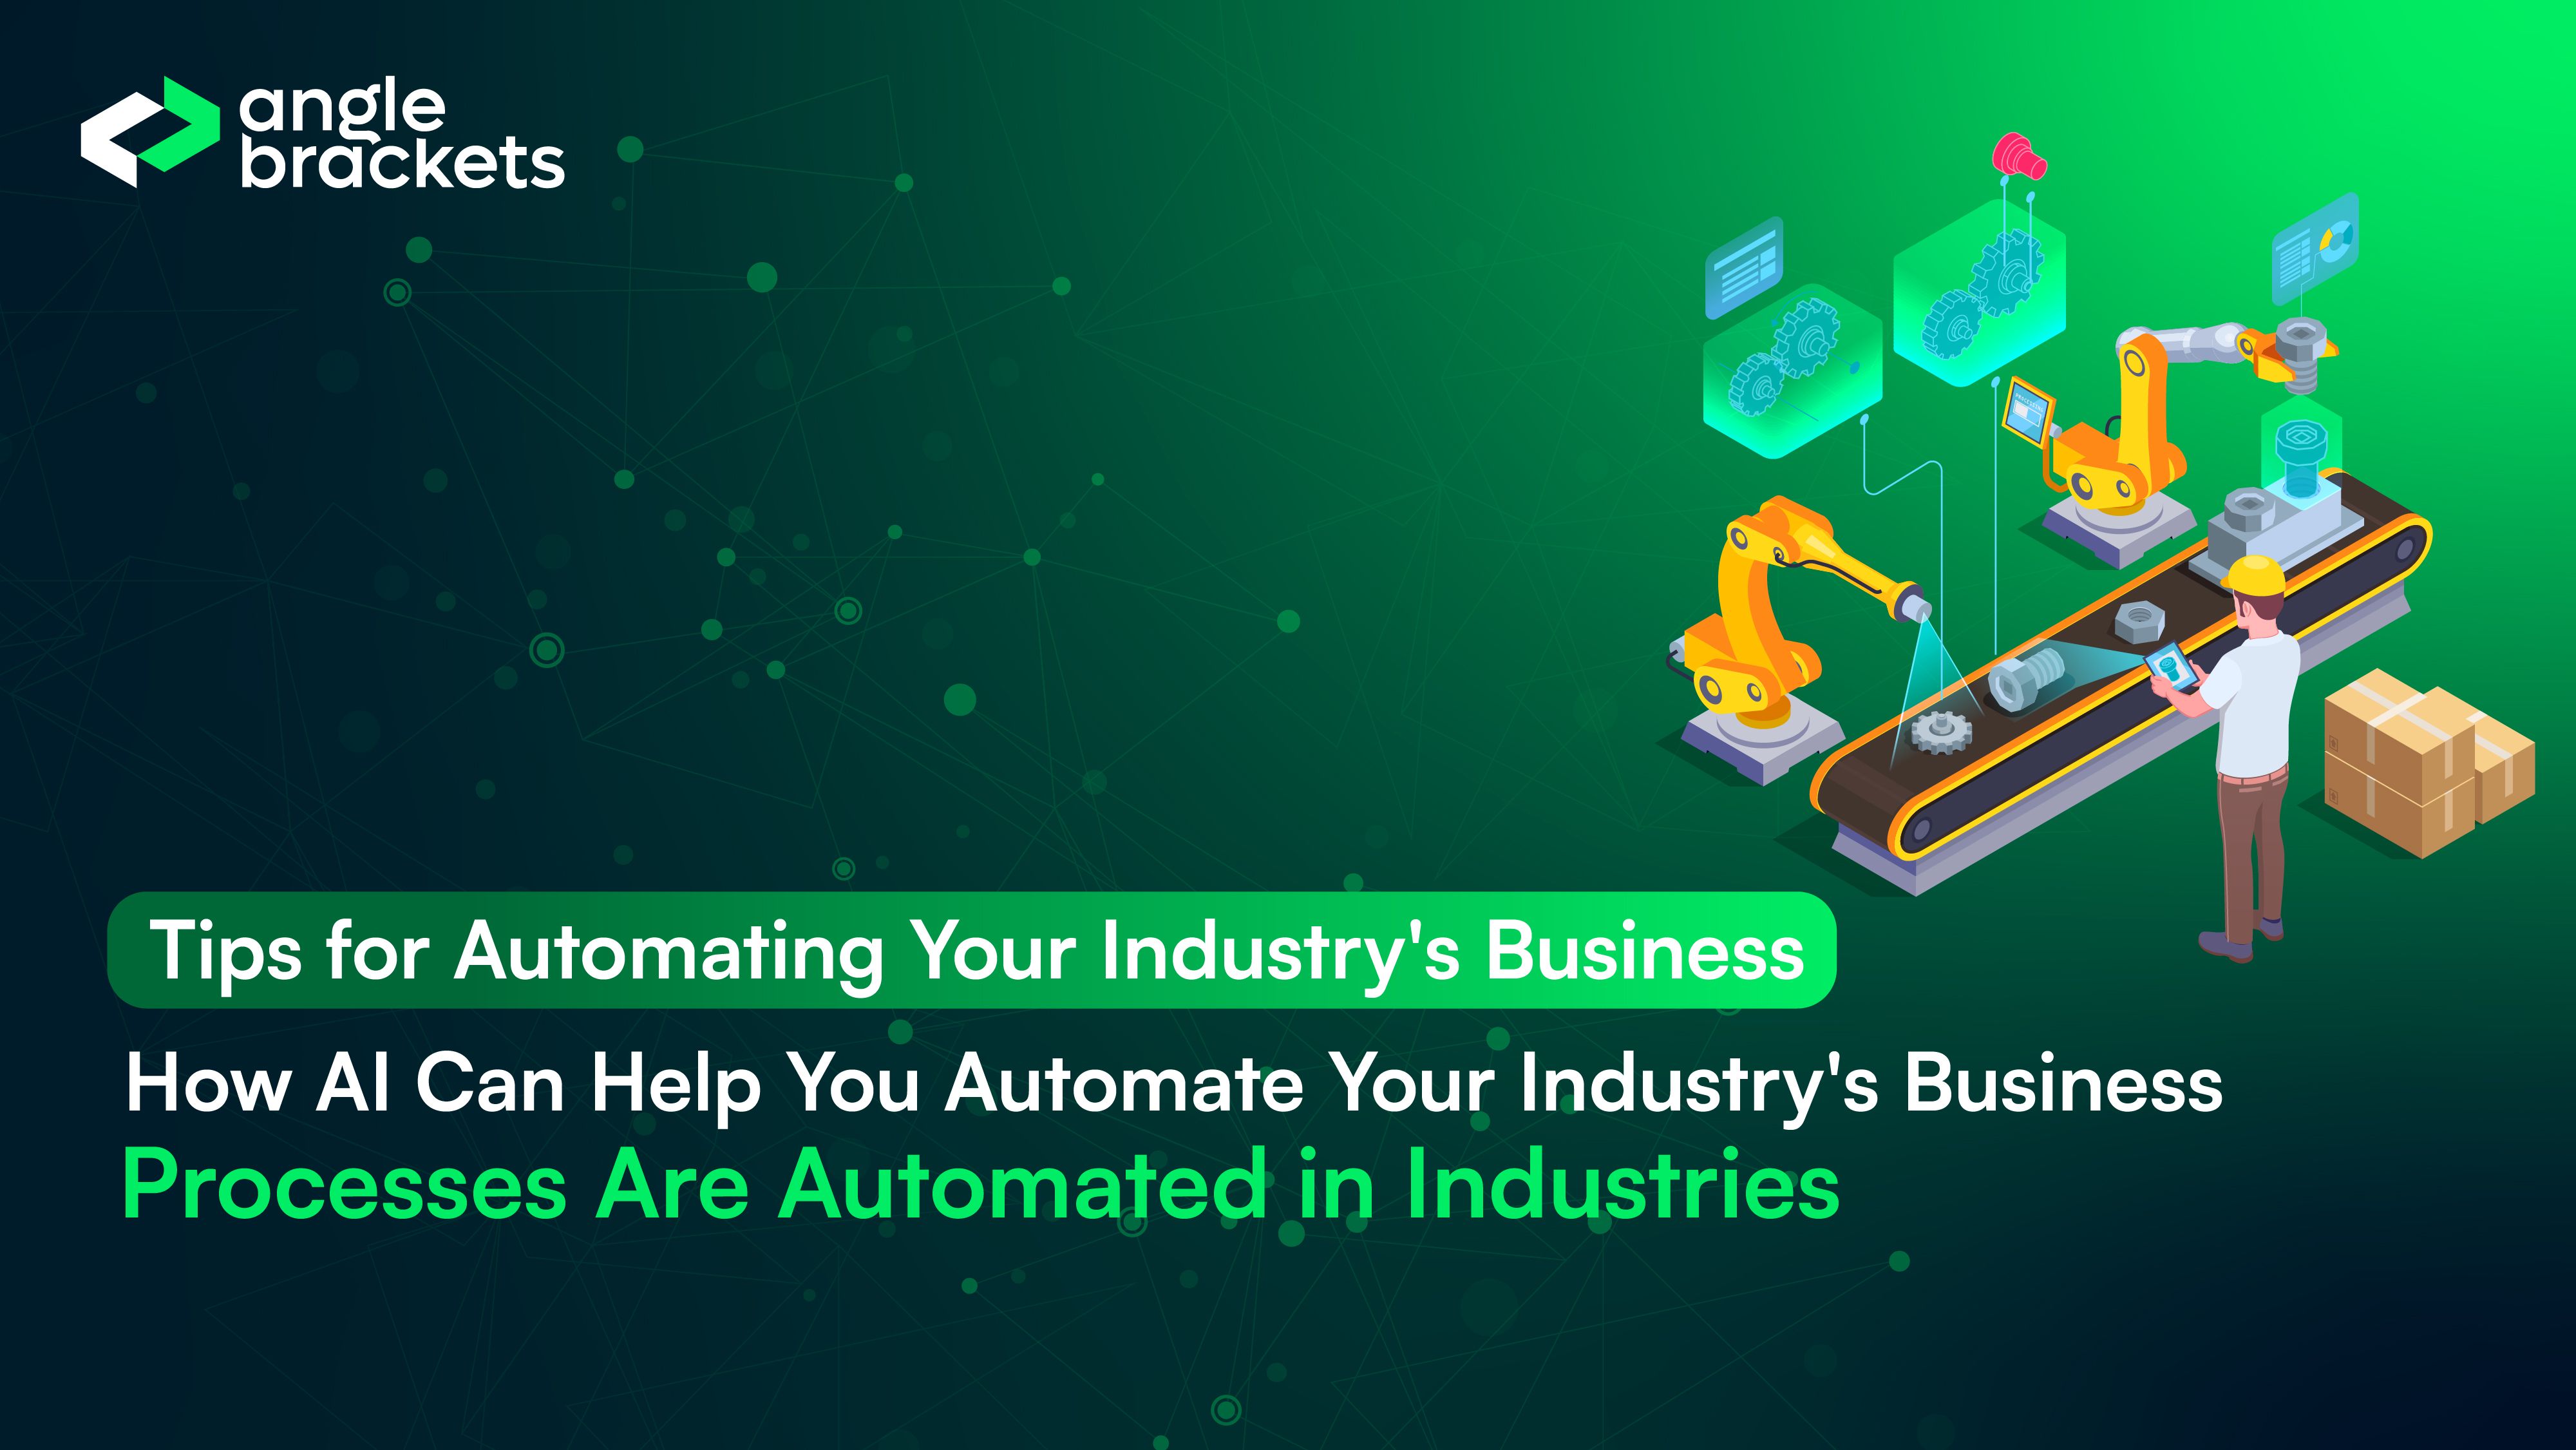 How AI Can Help You Automate Your Industry's Business and Achieve Your Goals